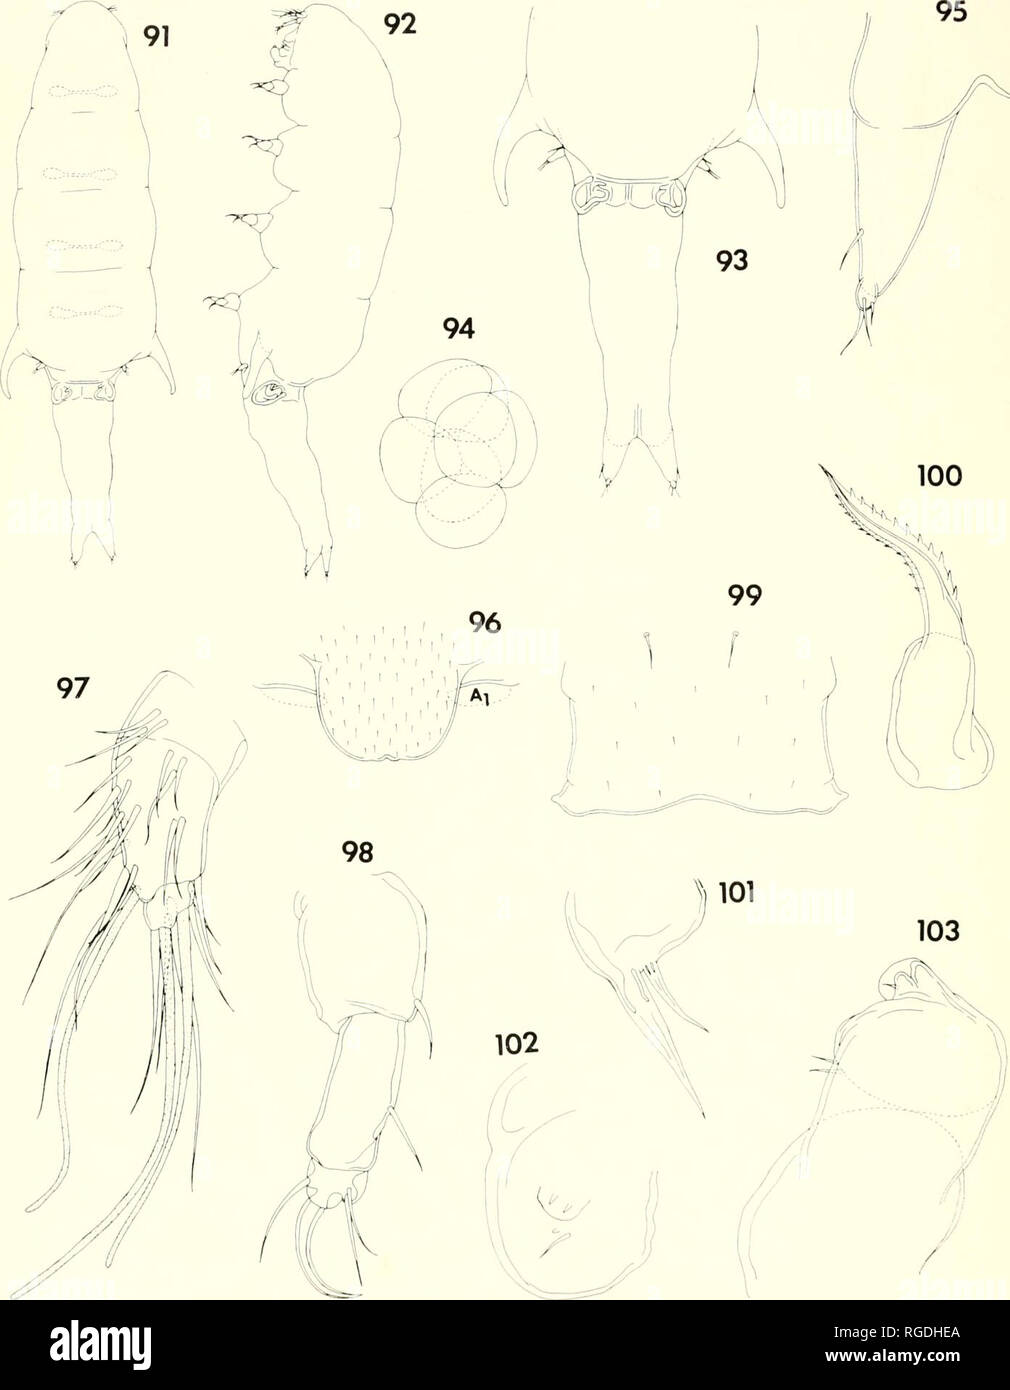 . Bulletin of the Museum of Comparative Zoology at Harvard College. Zoology. 446 BiiUctin Miisetiin of Coniparativc 7A)ologij. Vol. 136. o. 11. Figures 91-103. Xanlia obesa n. sp., female. 91, body, dorsal (A); 92, body, lateral (A); 93, urosome, dorsal (I); 94, egg sac, dorsal (I); 95, caudal ramus, dorsal (G); 96, rostrum, anteroventral (C); 97, first antenna, anterior (D); 98, second antenna, anteroventral (D); 99, labrum, ventral (C); 100, mandible, ventral (E); 101, first maxilla, ventral (E); 102, second maxilla, ventral (El; 103, maxilliped, outer (D).. Please note that these images ar Stock Photo